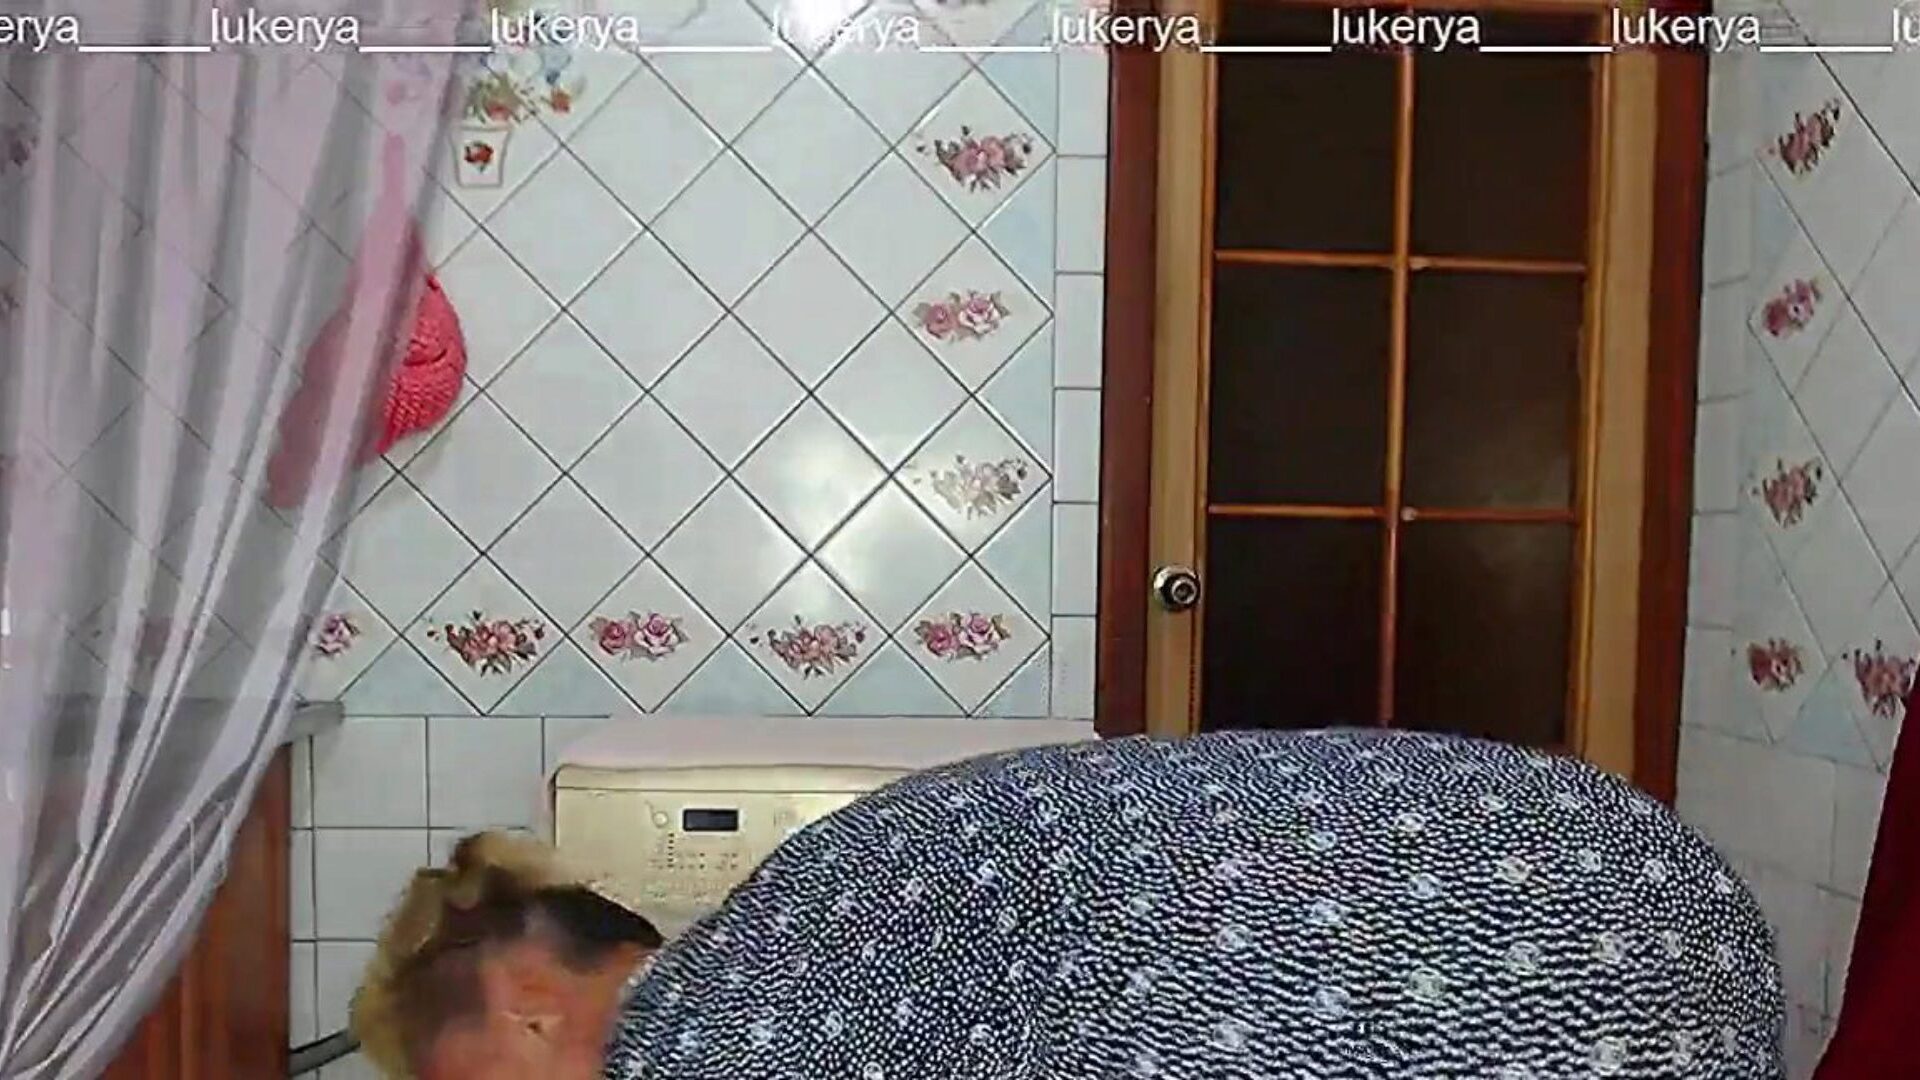 Lukerya in ebony fishnet nylons Lukerya wears african fishnet nylons that she has crocheted, erotic lingerie that enhances the beauty of her figure and guzzles coffee in the kitchen in front of the livecam